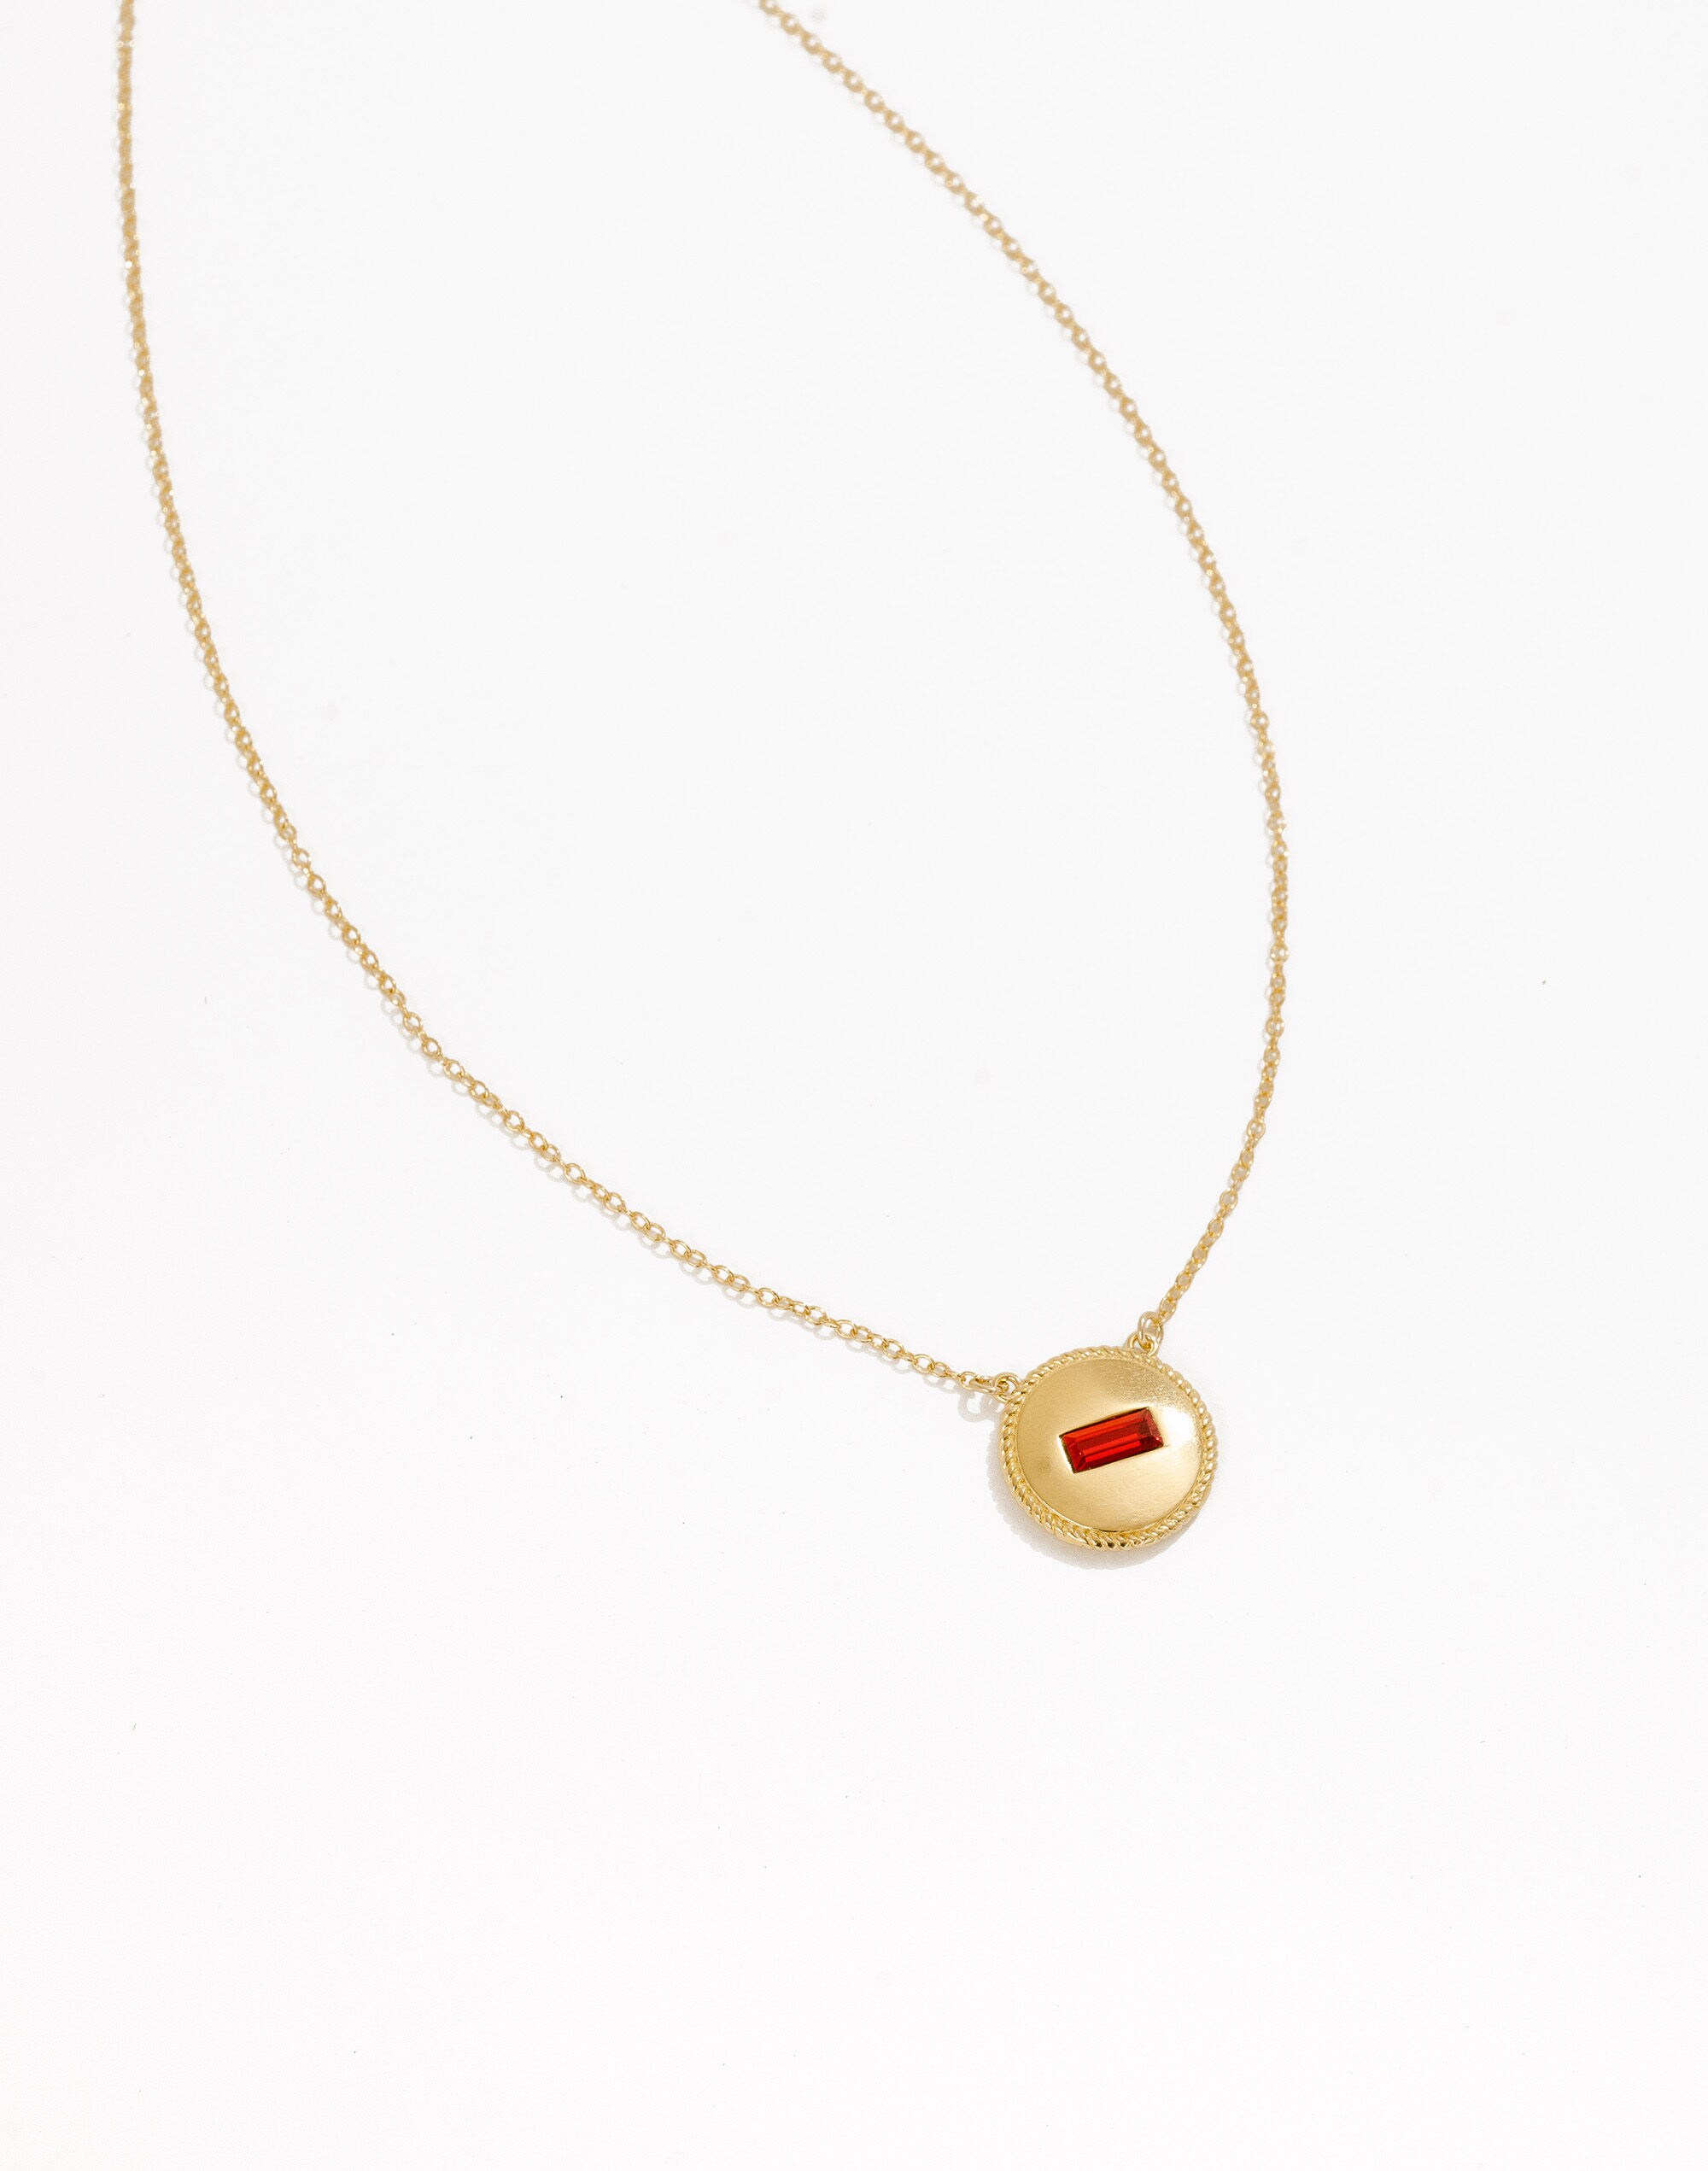 Madewell x Katie Dean Jewelry™ Coin Birthstone Necklace